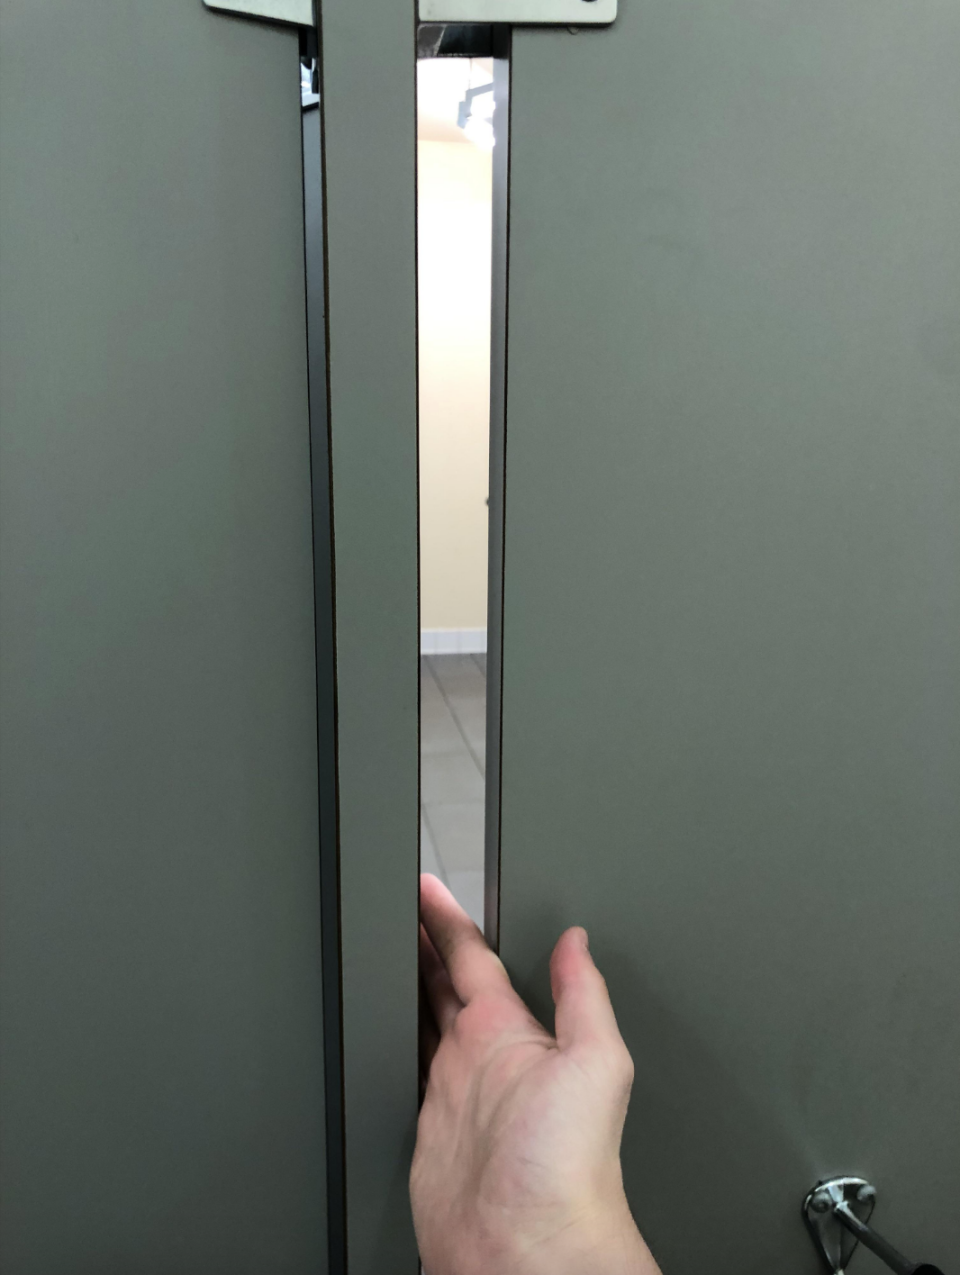 Person's hand pushing a stall door slightly ajar in a restroom, highlighting a privacy concern